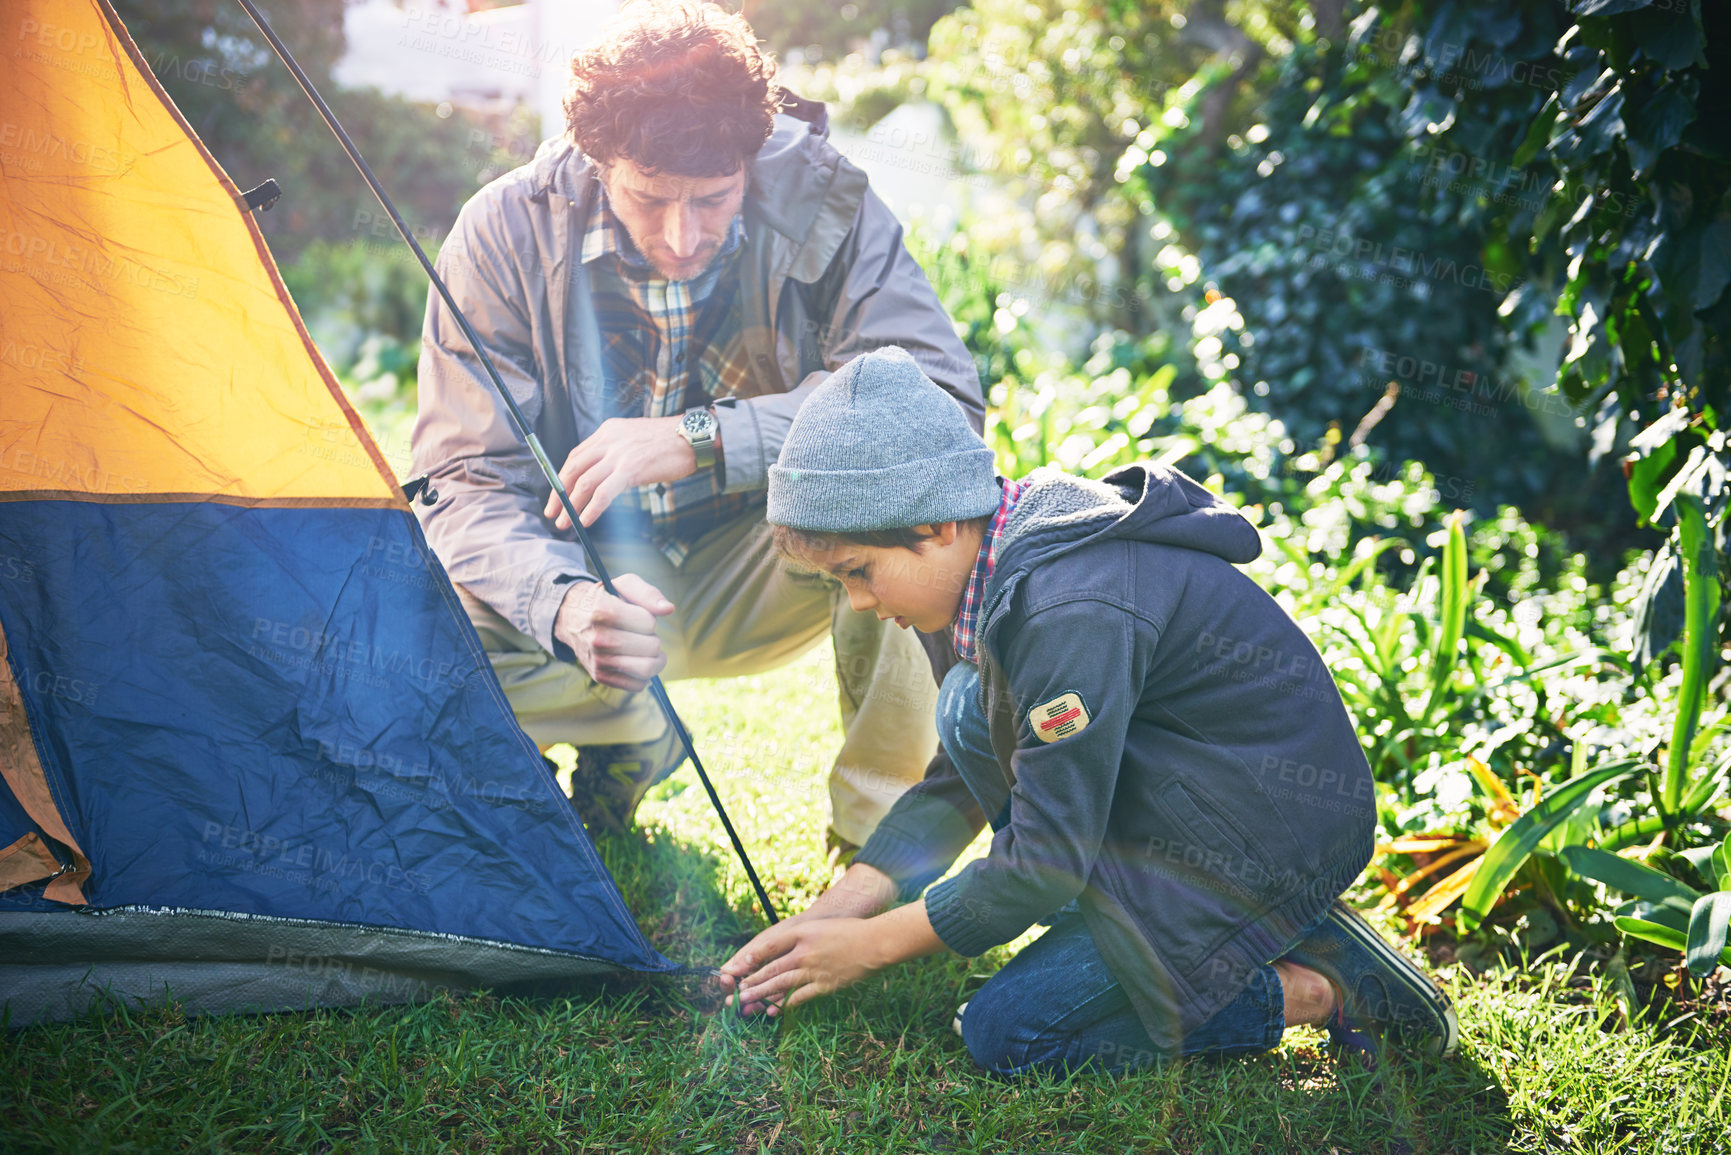 Buy stock photo Shot of a father and his young son putting up their tent